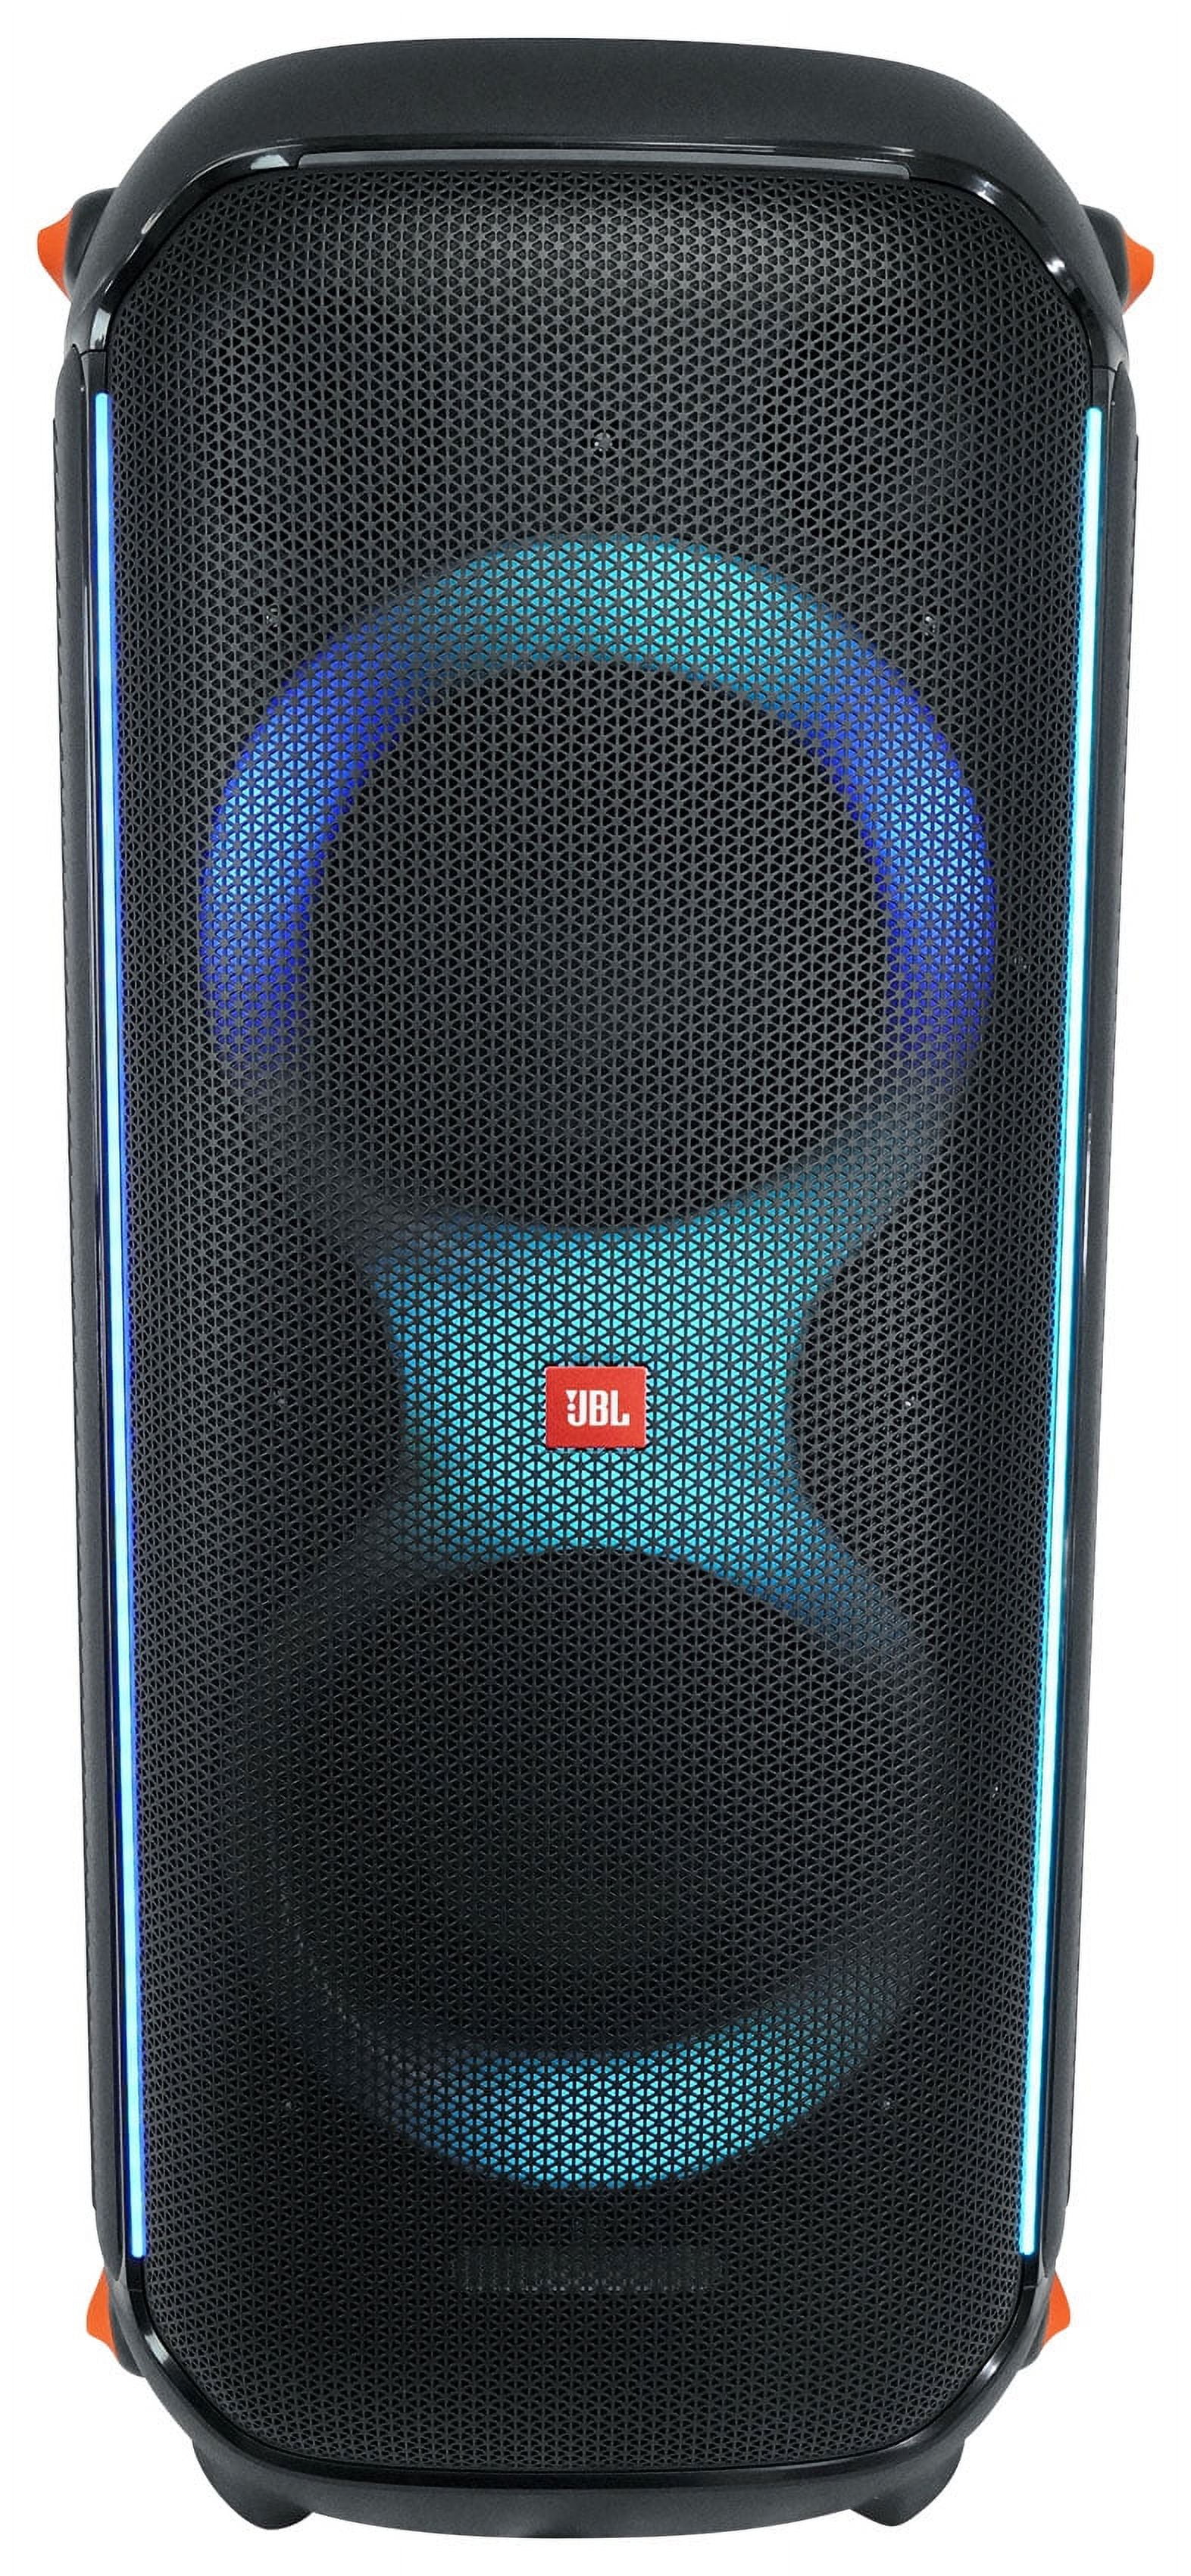 JBL PartyBox 710: An 800W speaker that's user friendly and sounds